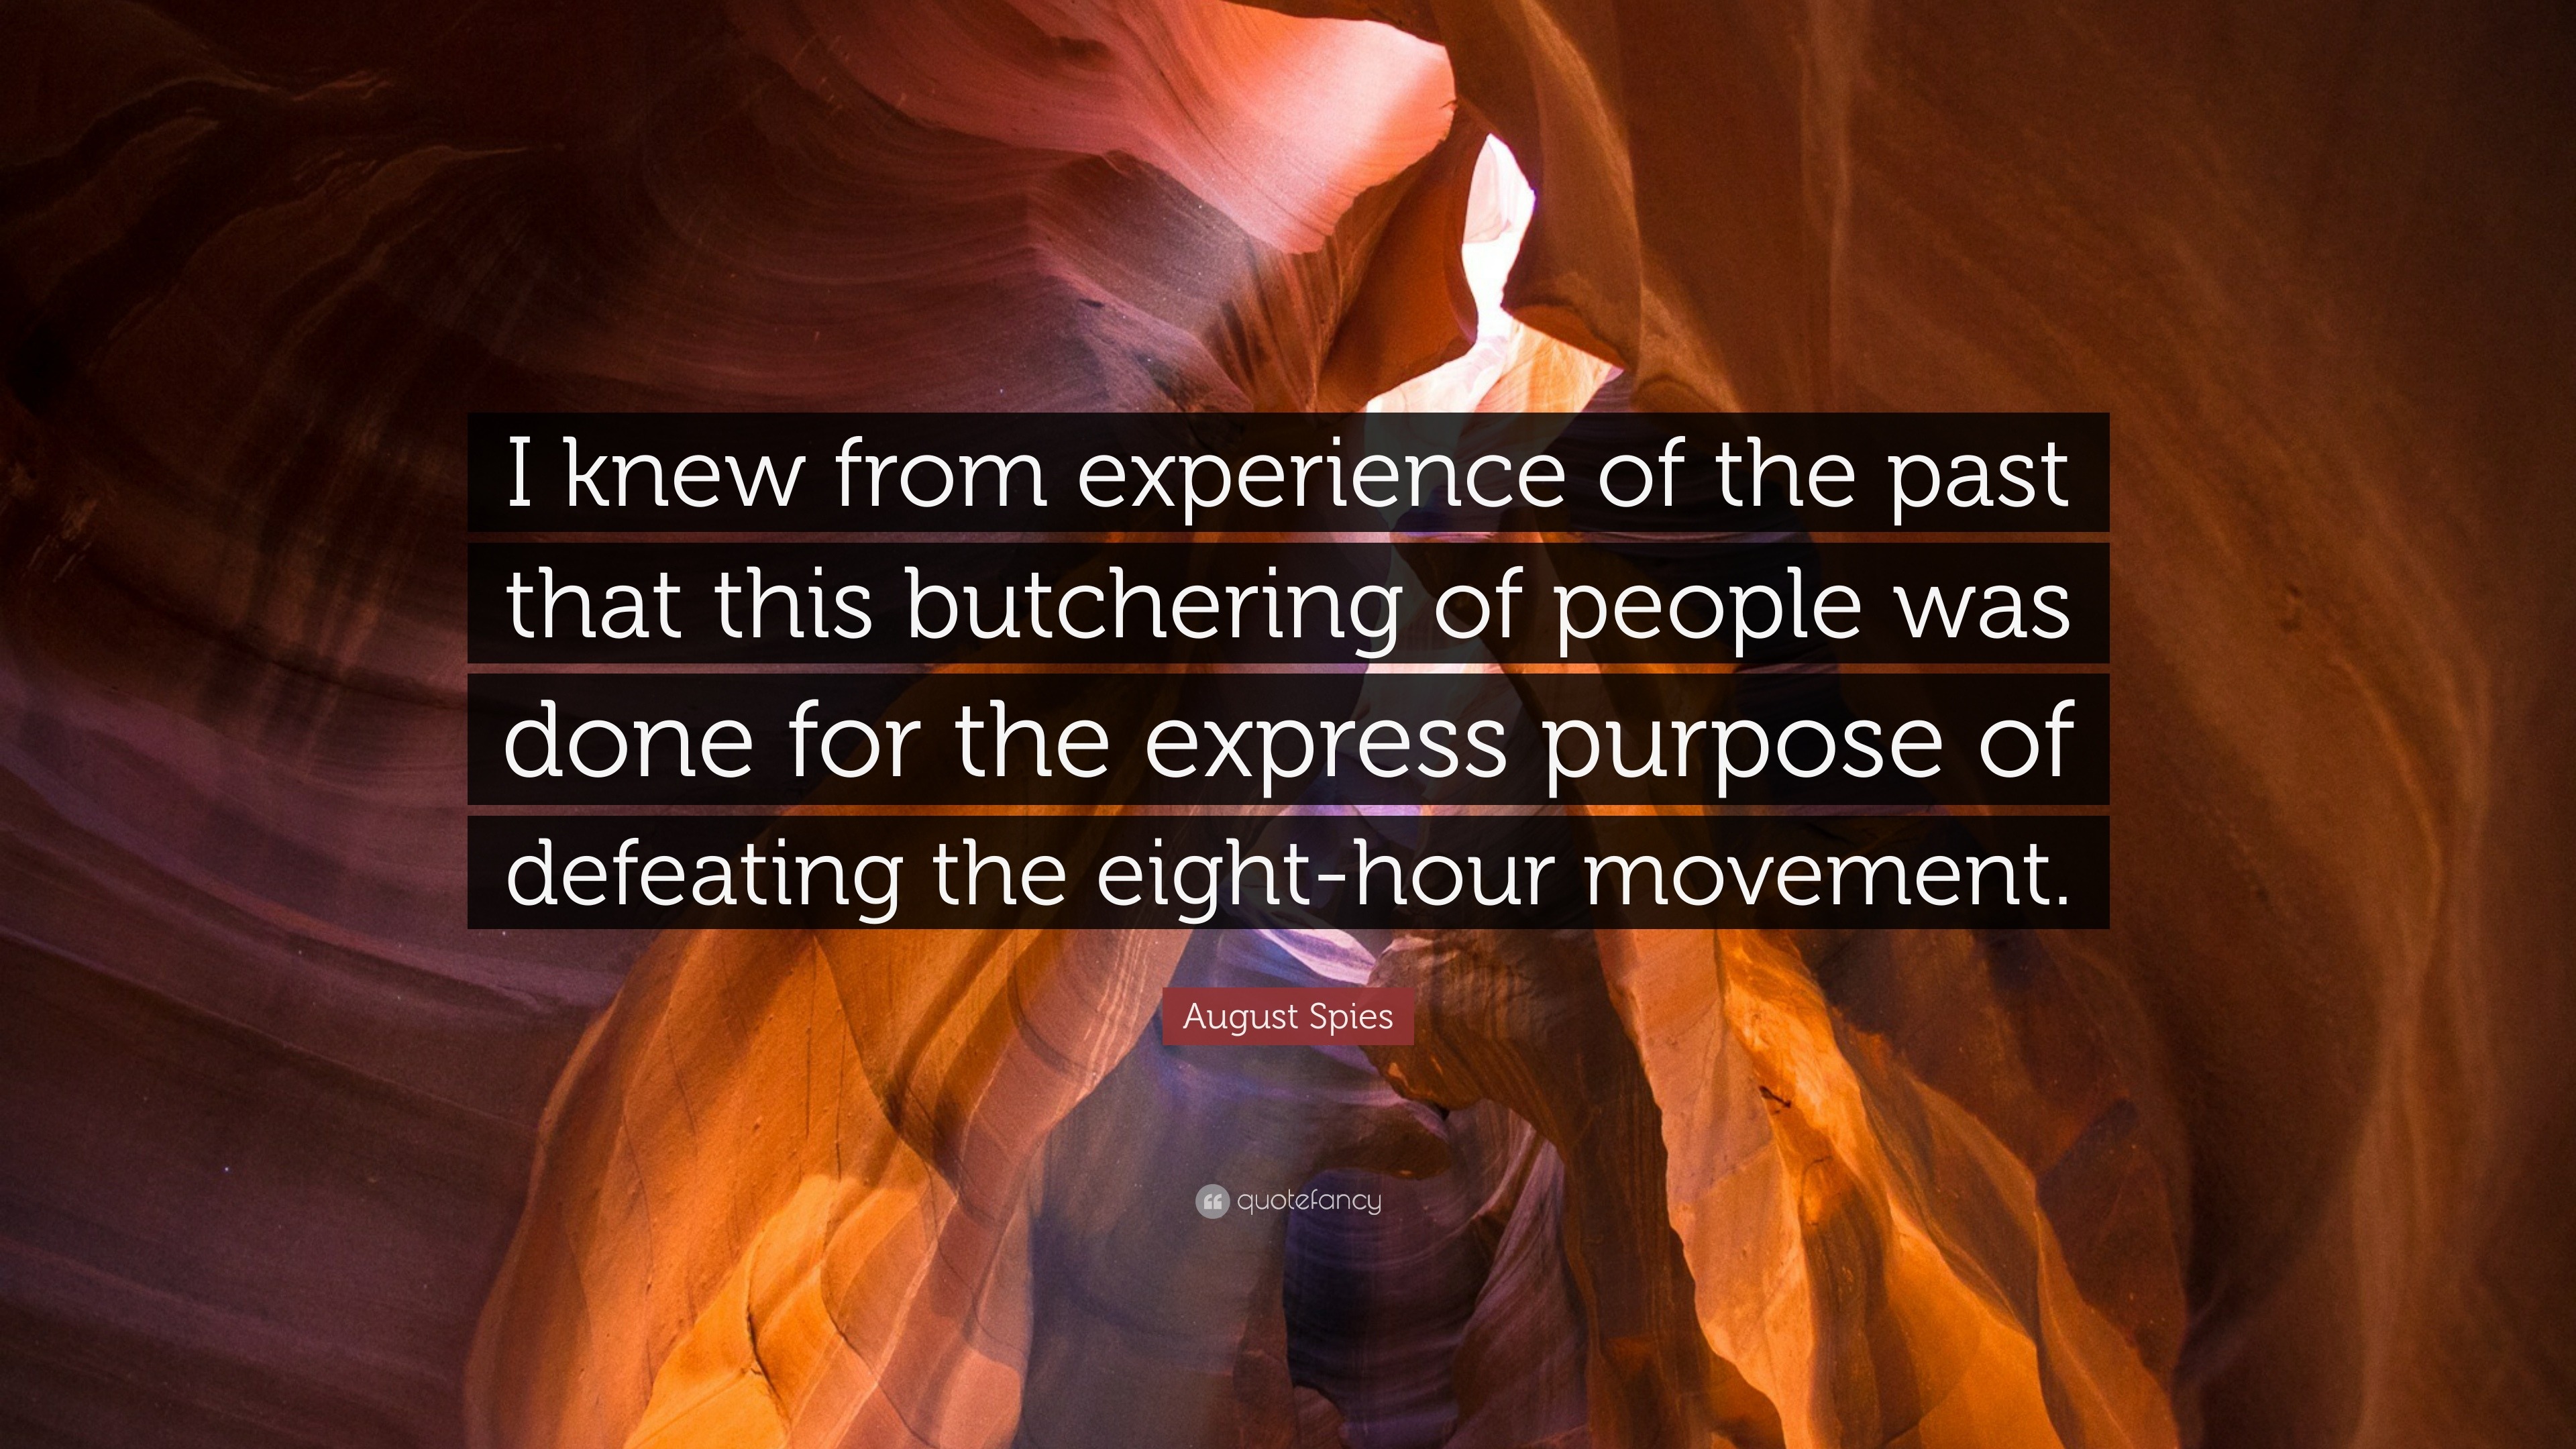 August Spies Quote: “I knew from experience of the past that this ...